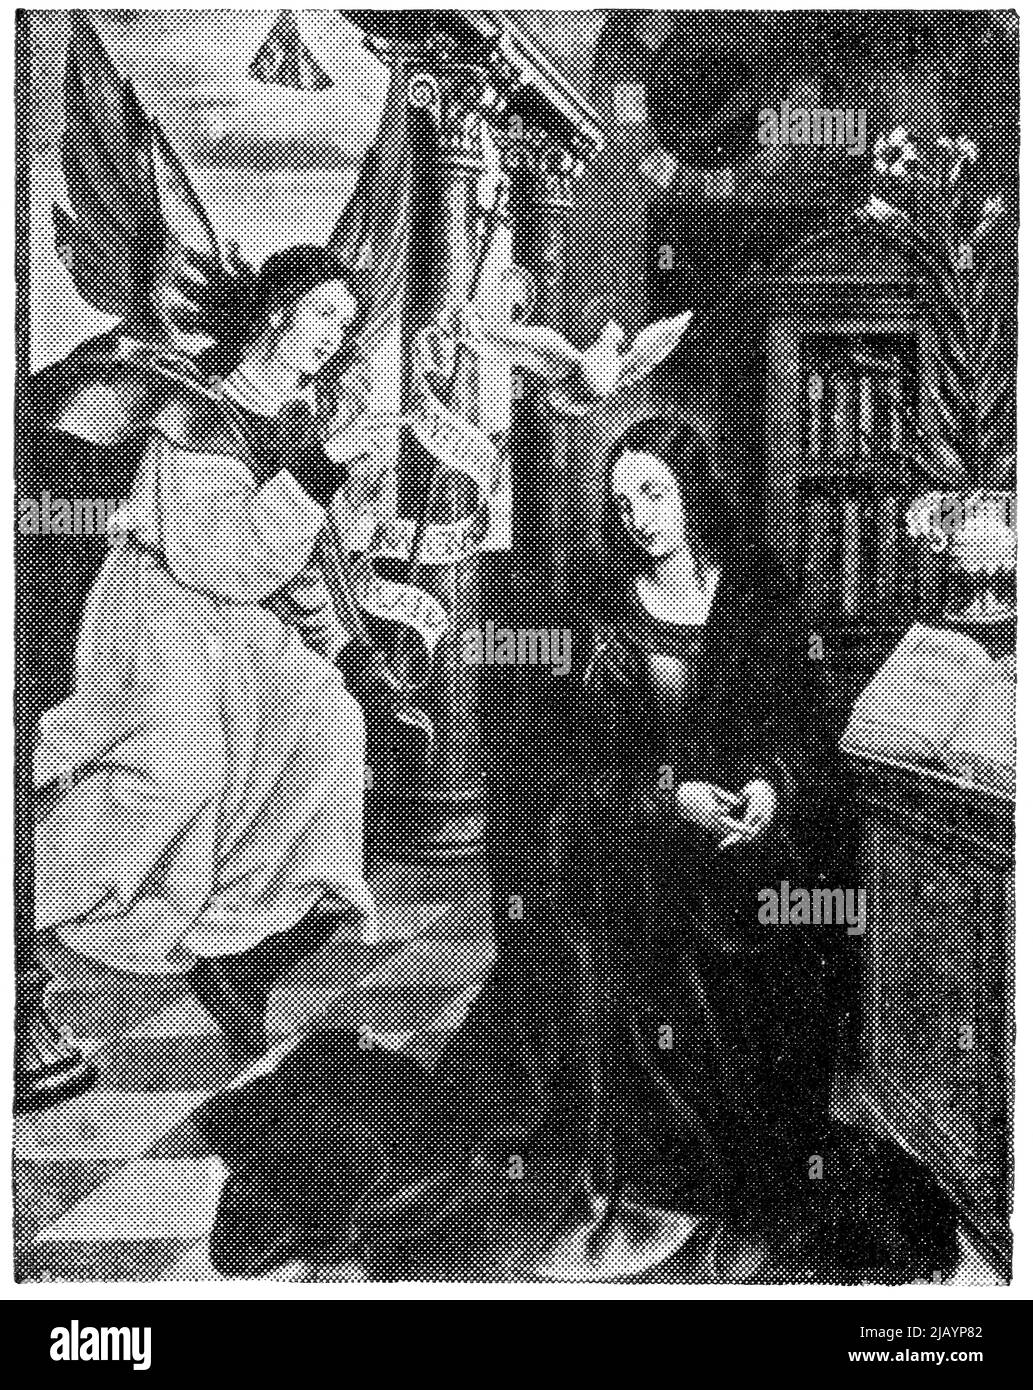 Feast of the Annunciation by a German painter Albrecht Altdorfer. Publication of the book 'Meyers Konversations-Lexikon', Volume 2, Leipzig, Germany, 1910 Stock Photo